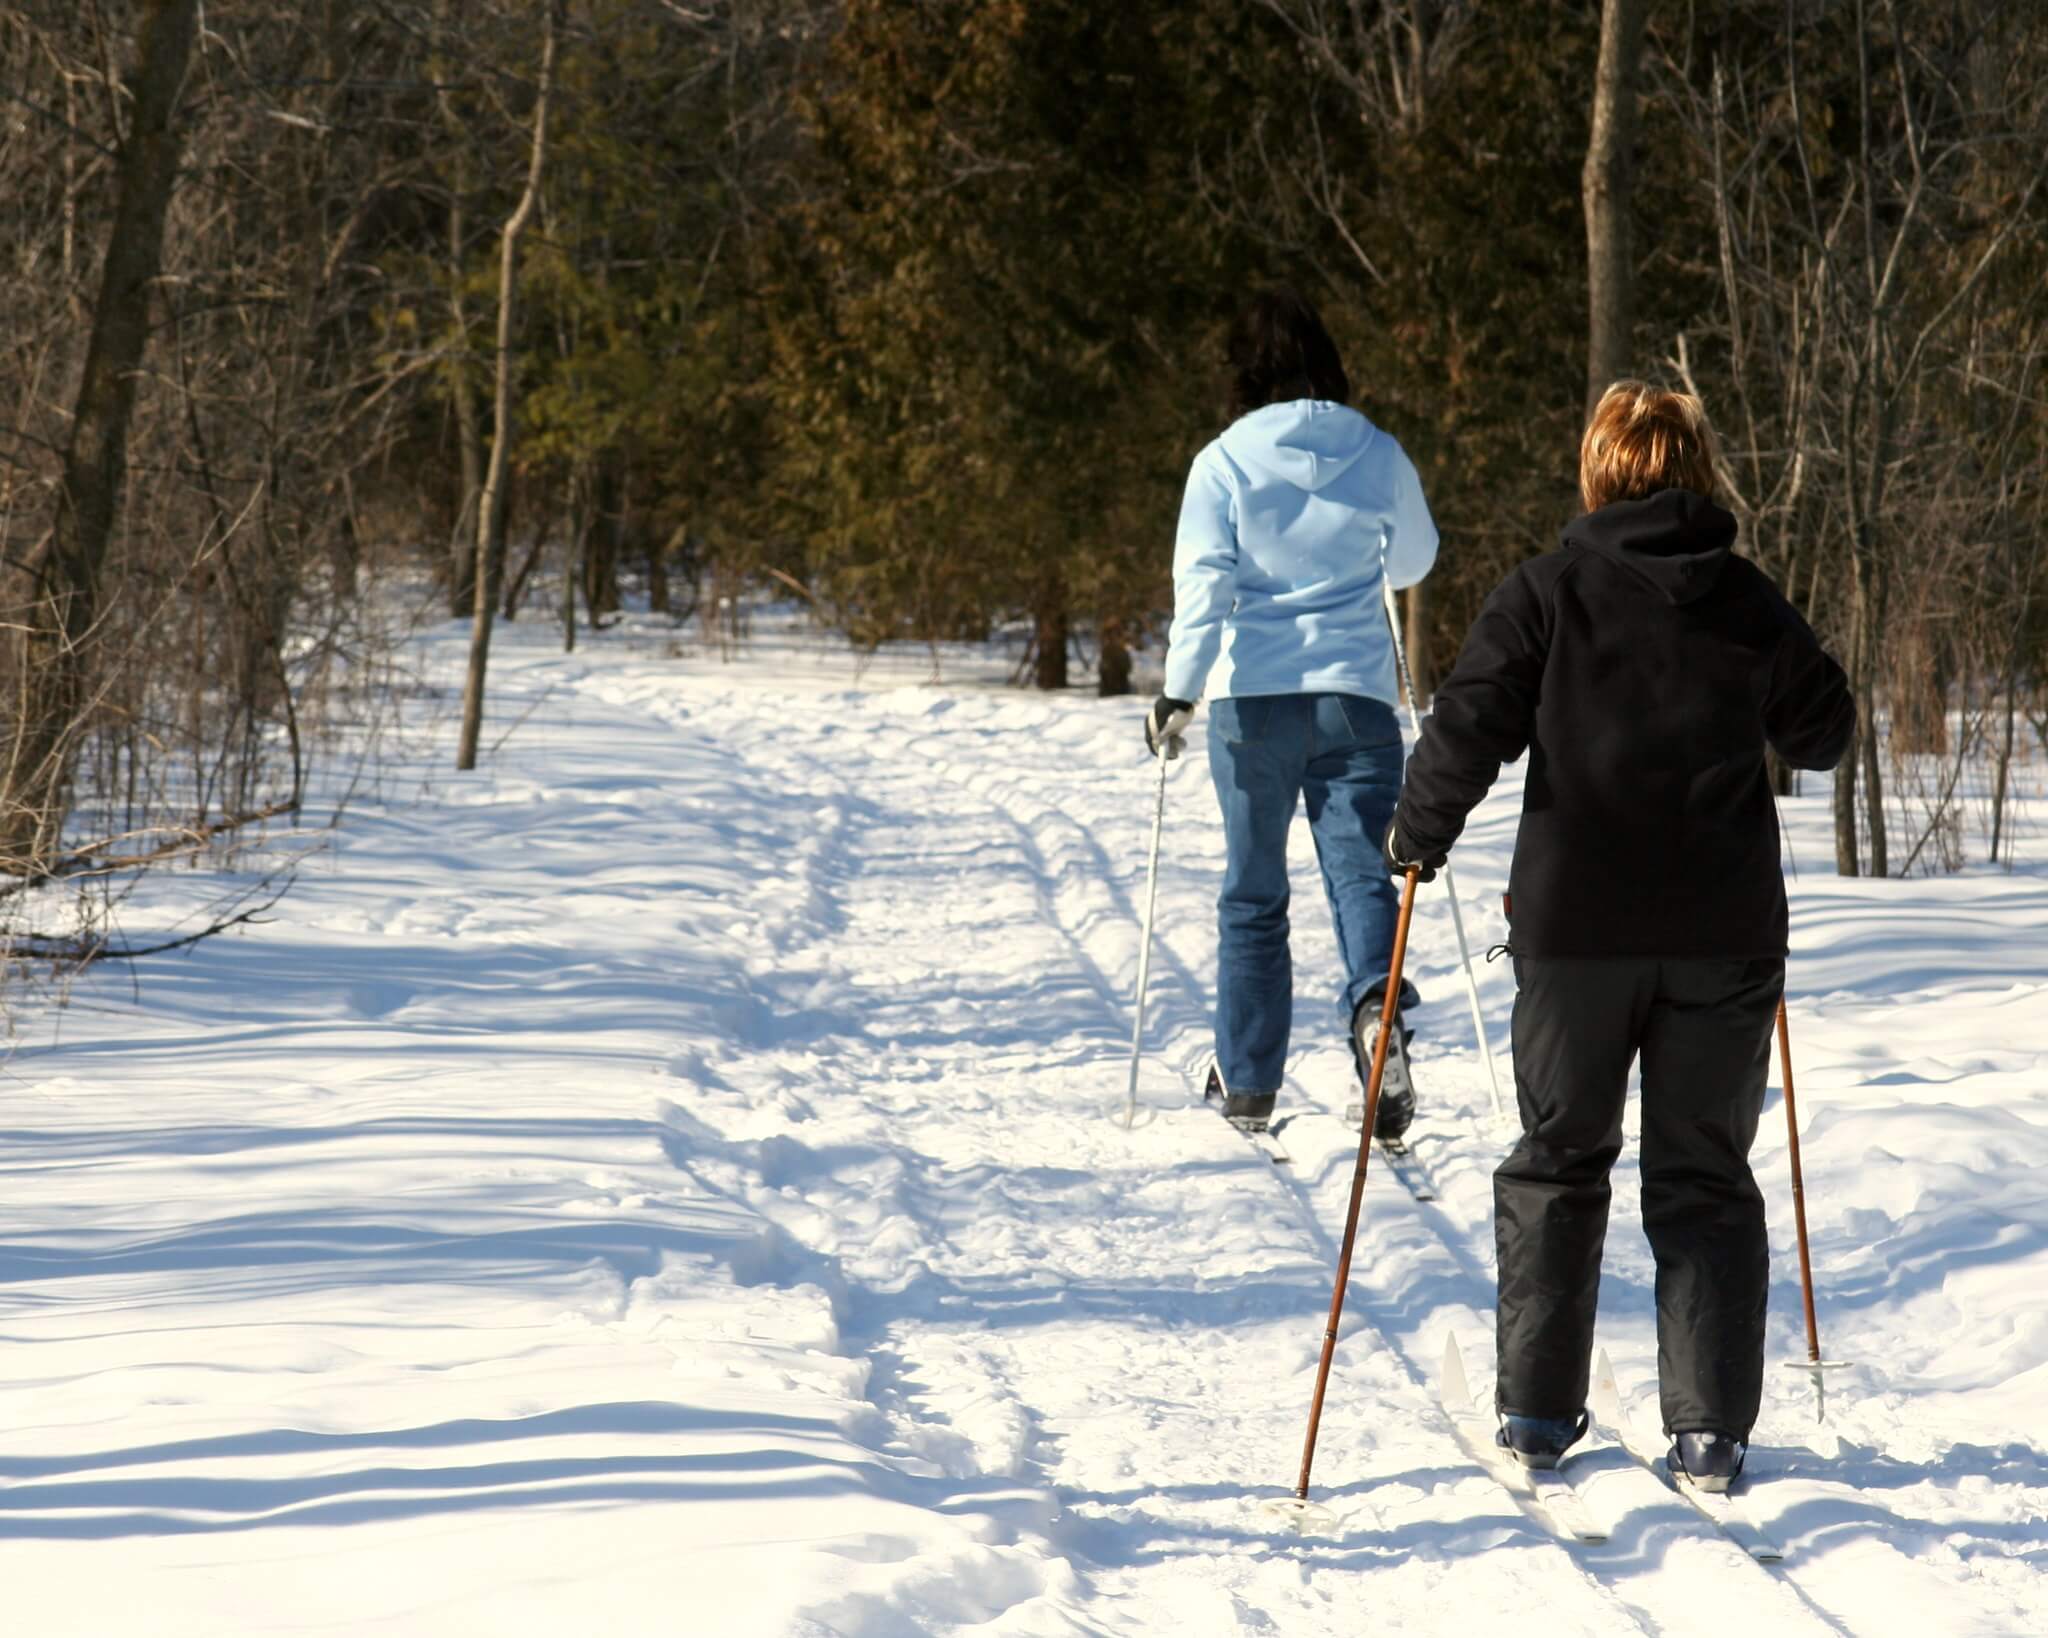 Two skiiers in a forest. The Knowles-Nelson Stewardship Program recently helped maintain a key ski trail connection on the MECCA Trail System.